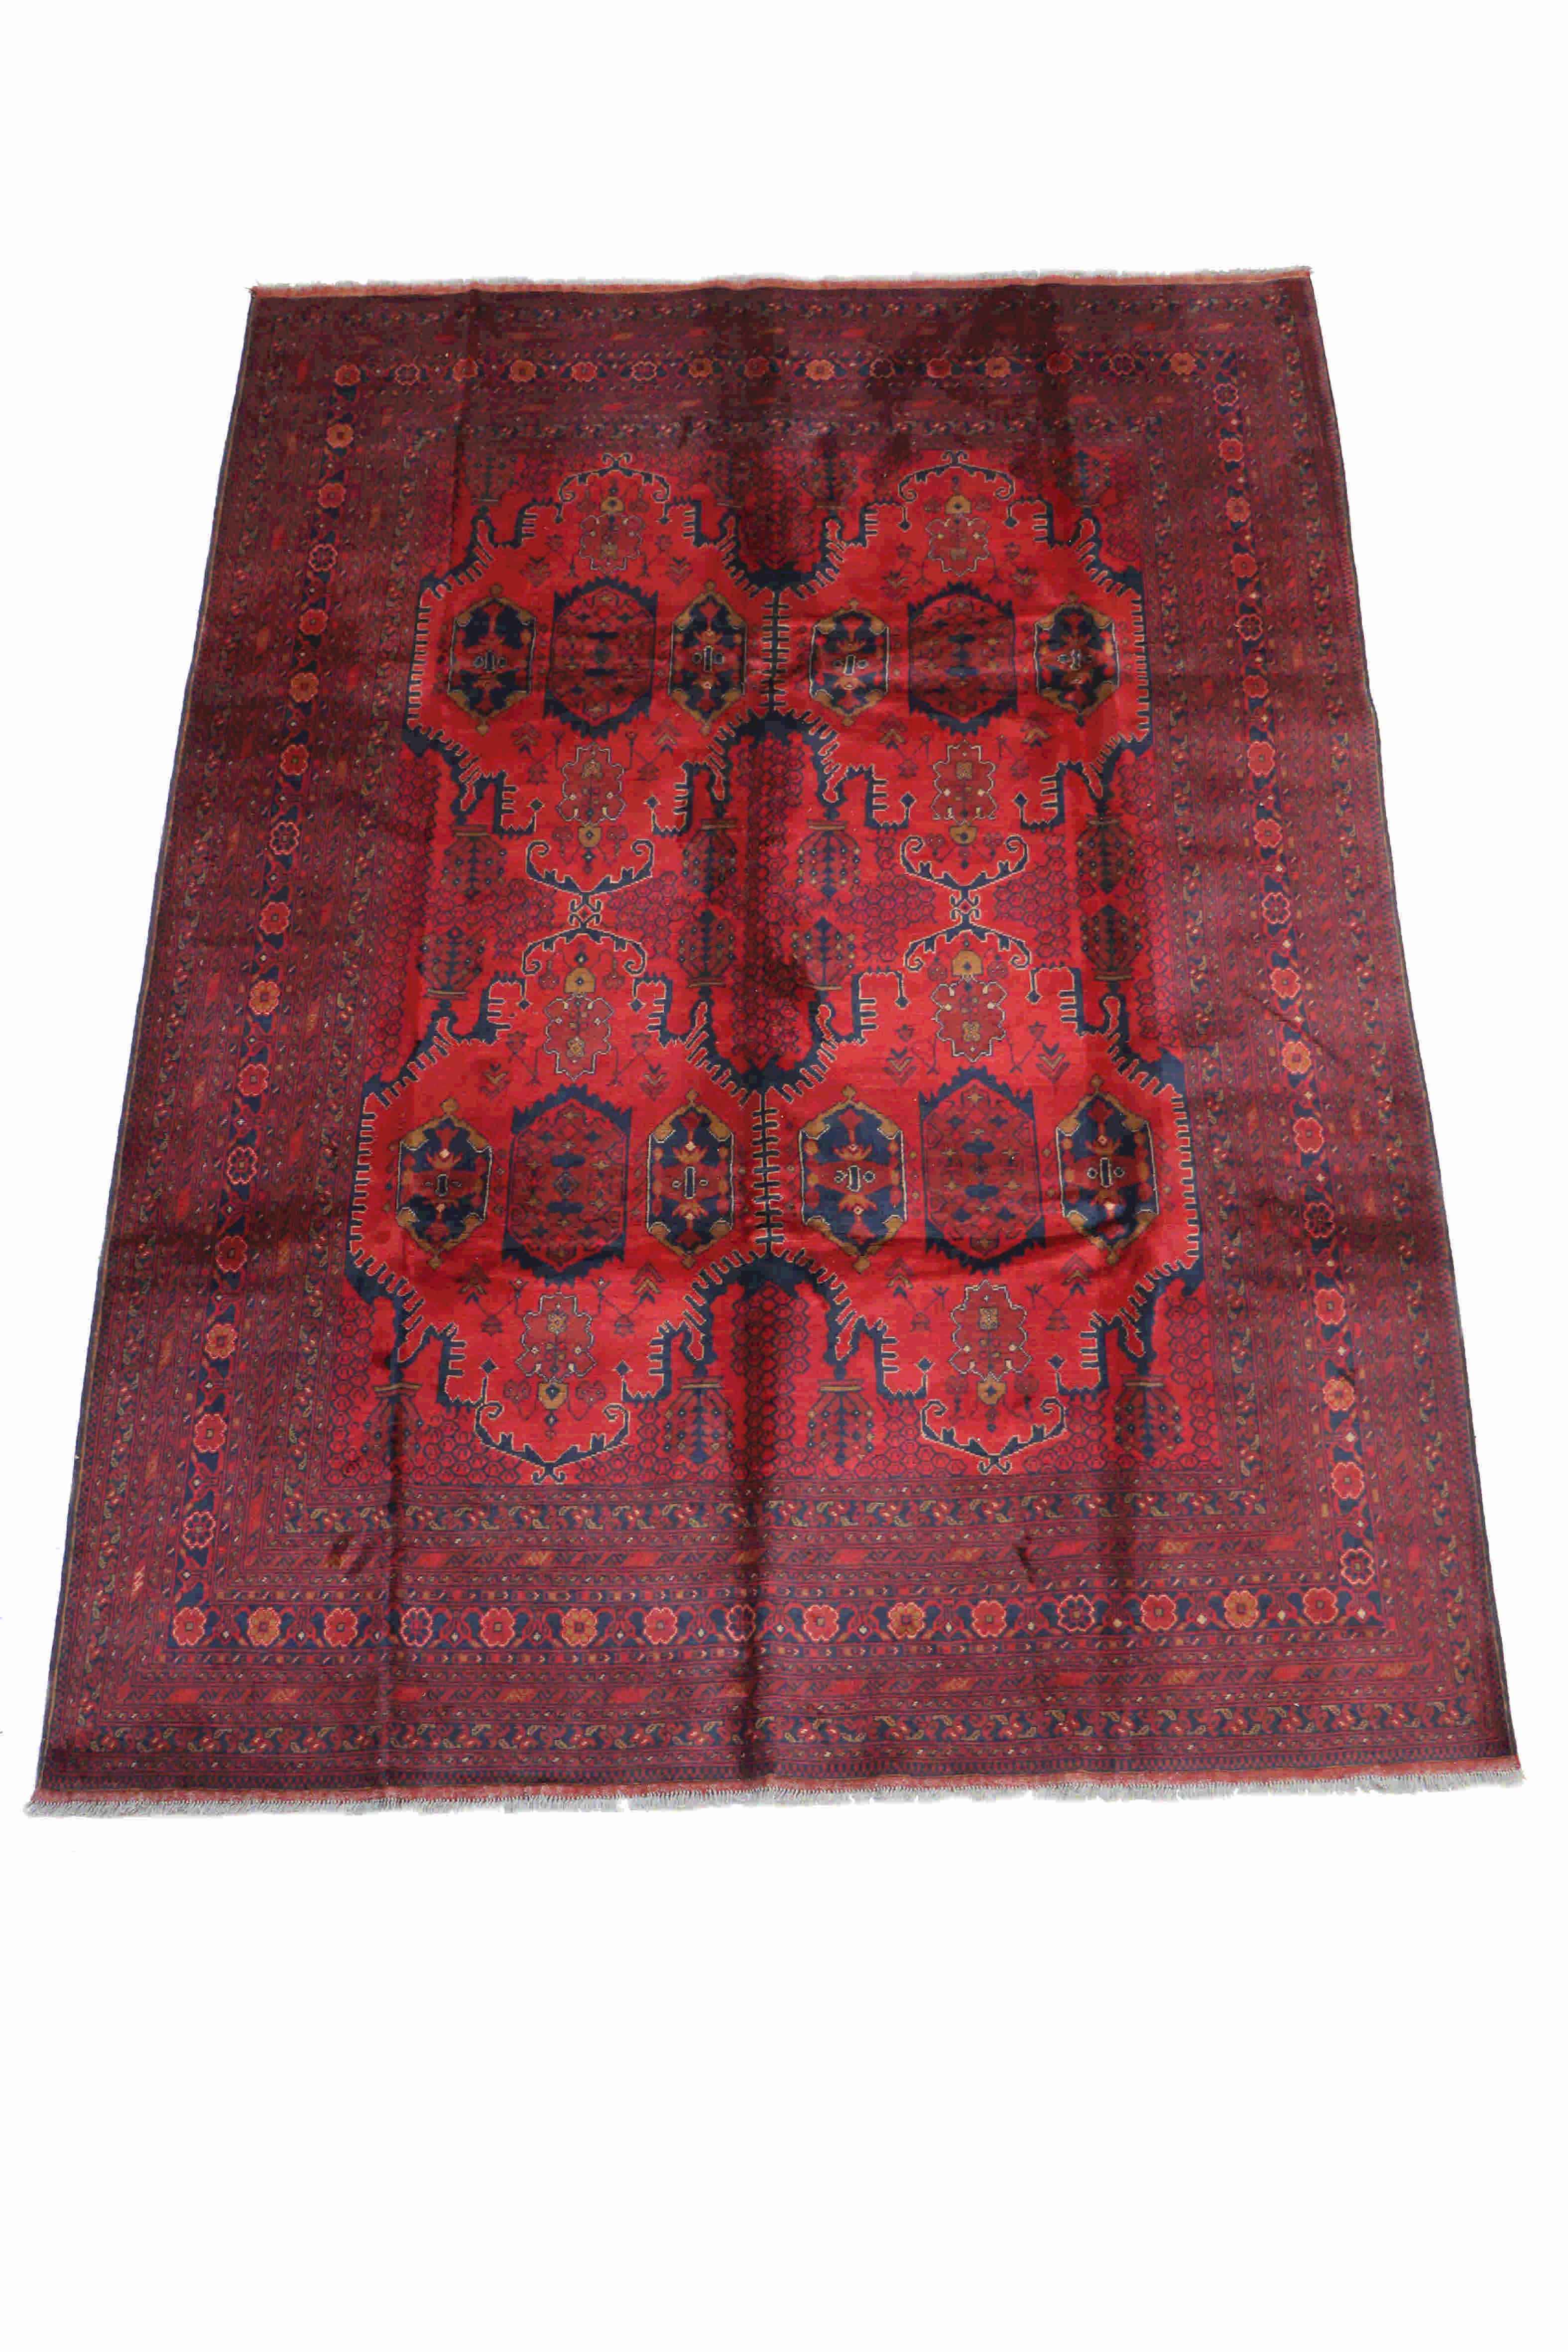 Red and Navy blue Afghan rug